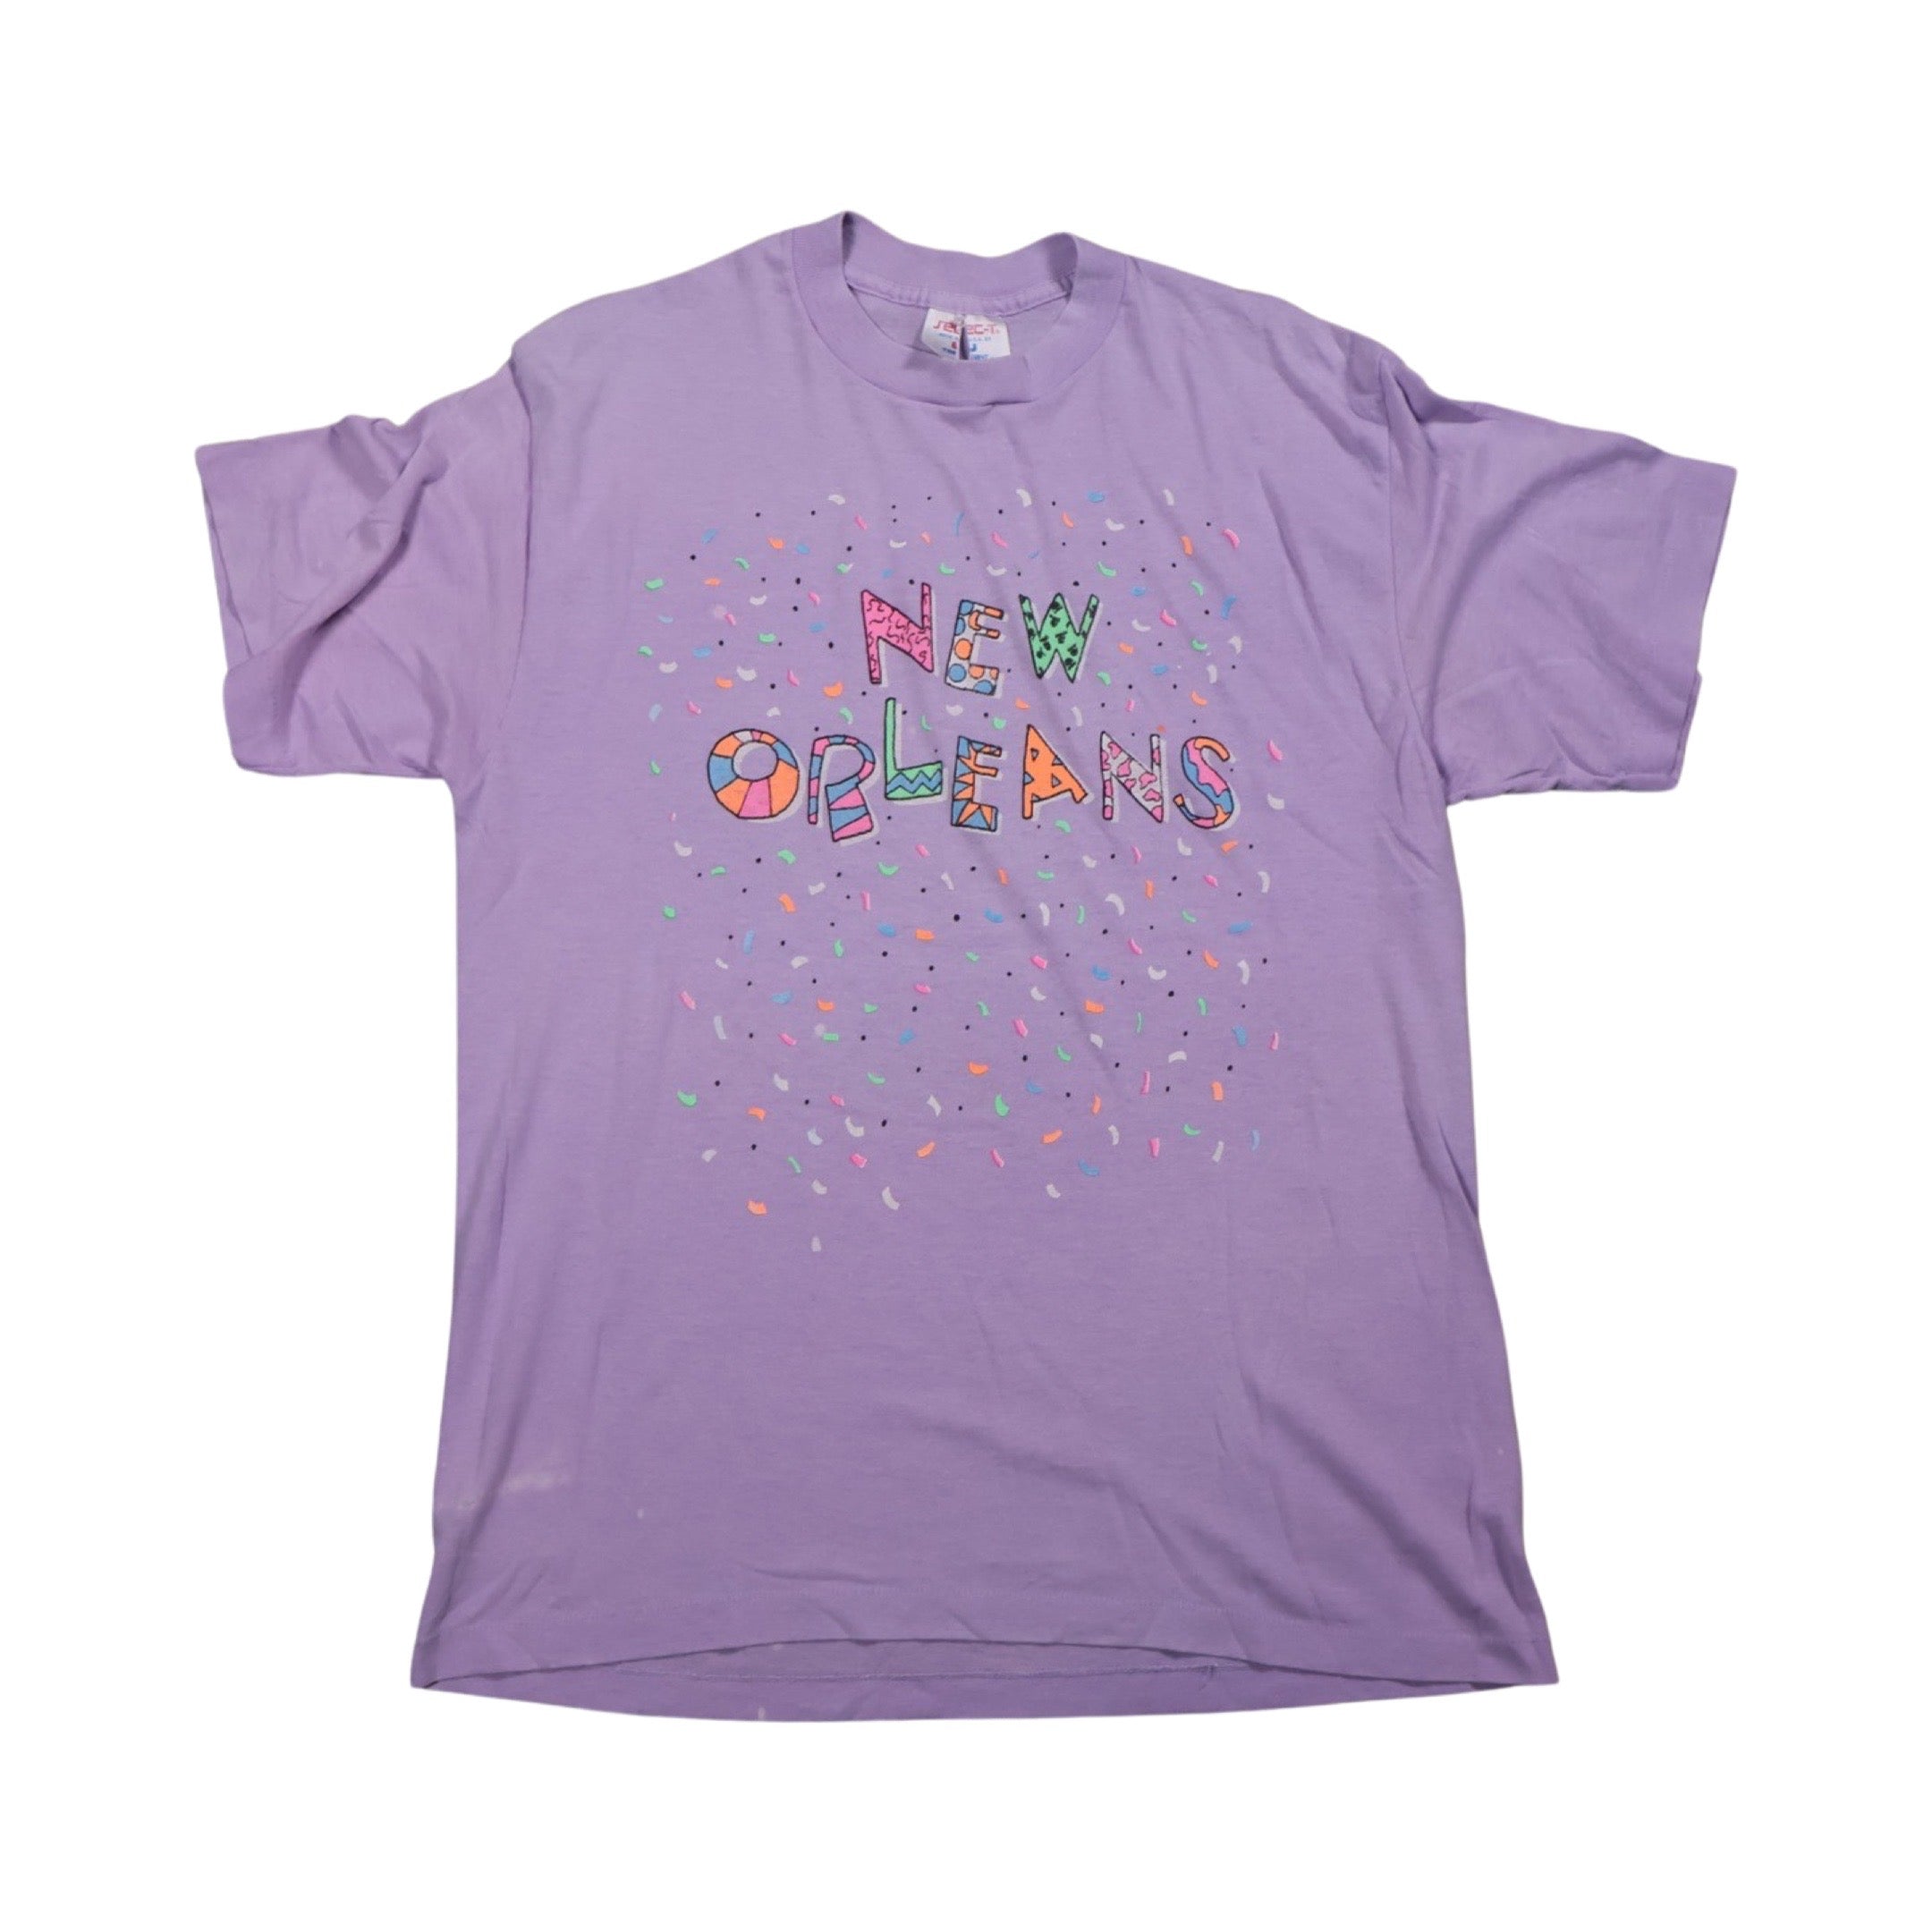 New Orleans Confetti 80s T-Shirt (Large)